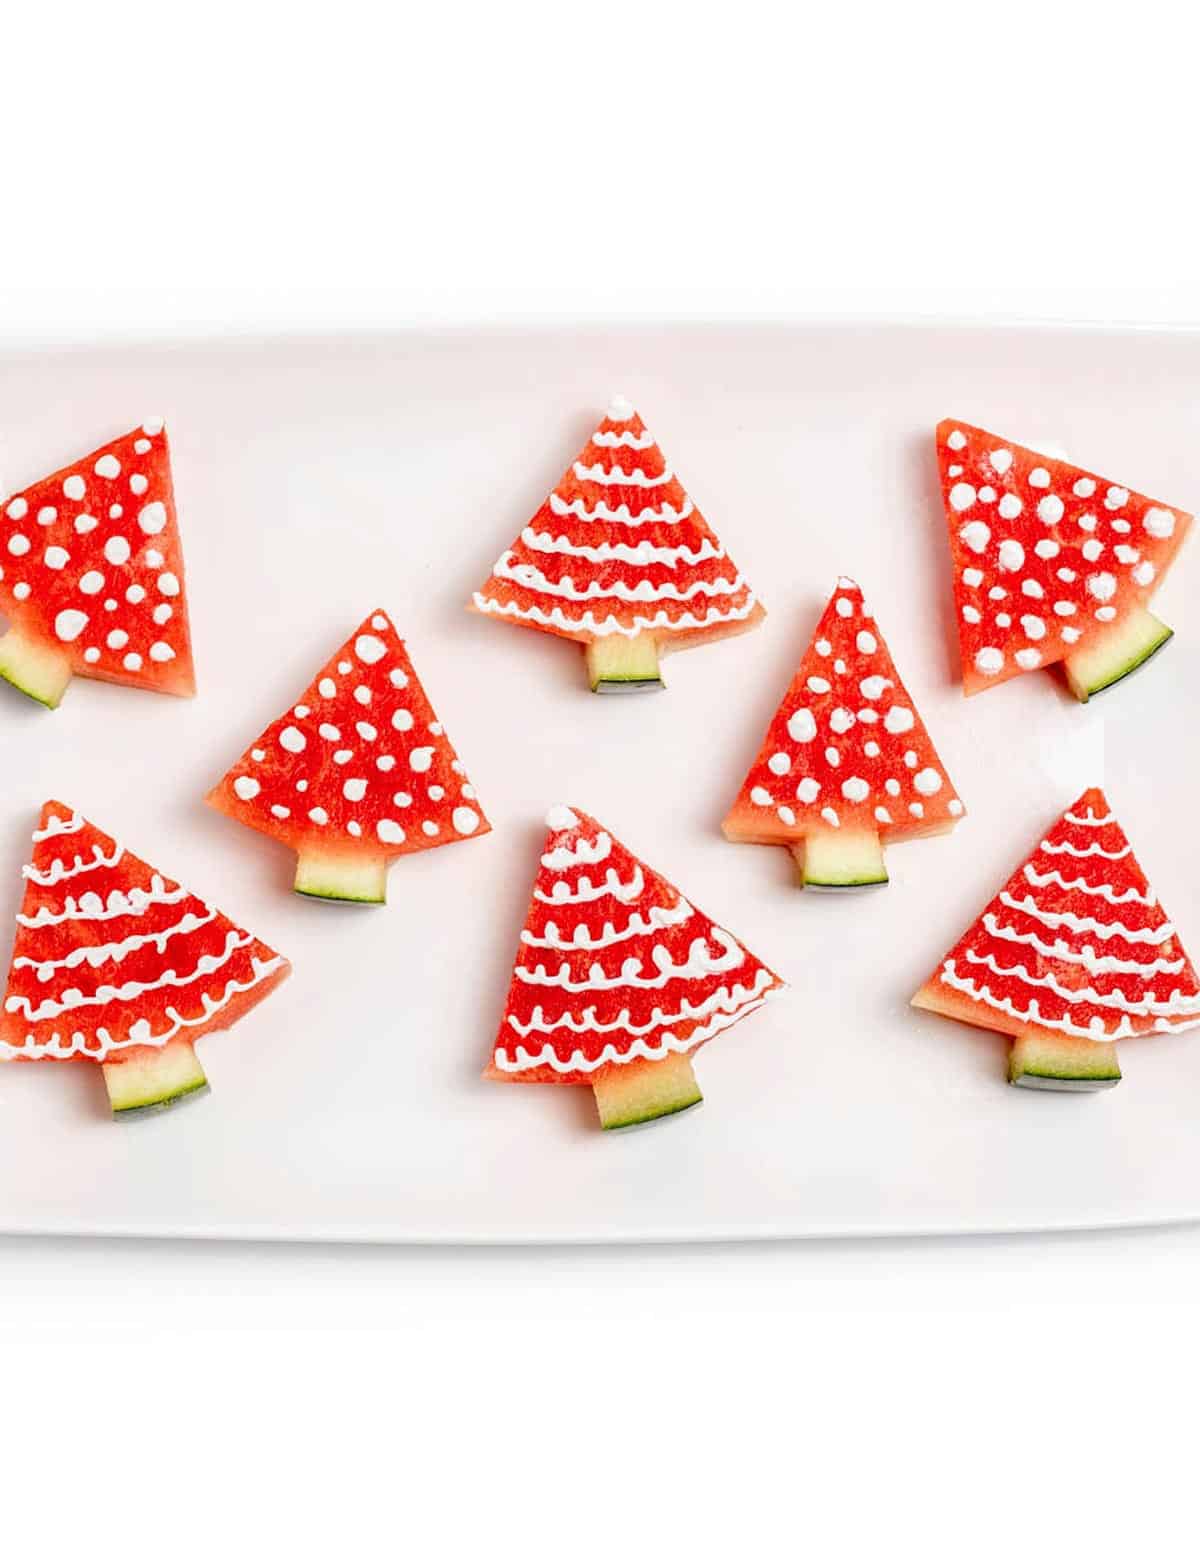 A tray with decorated watermelon Christmas trees.